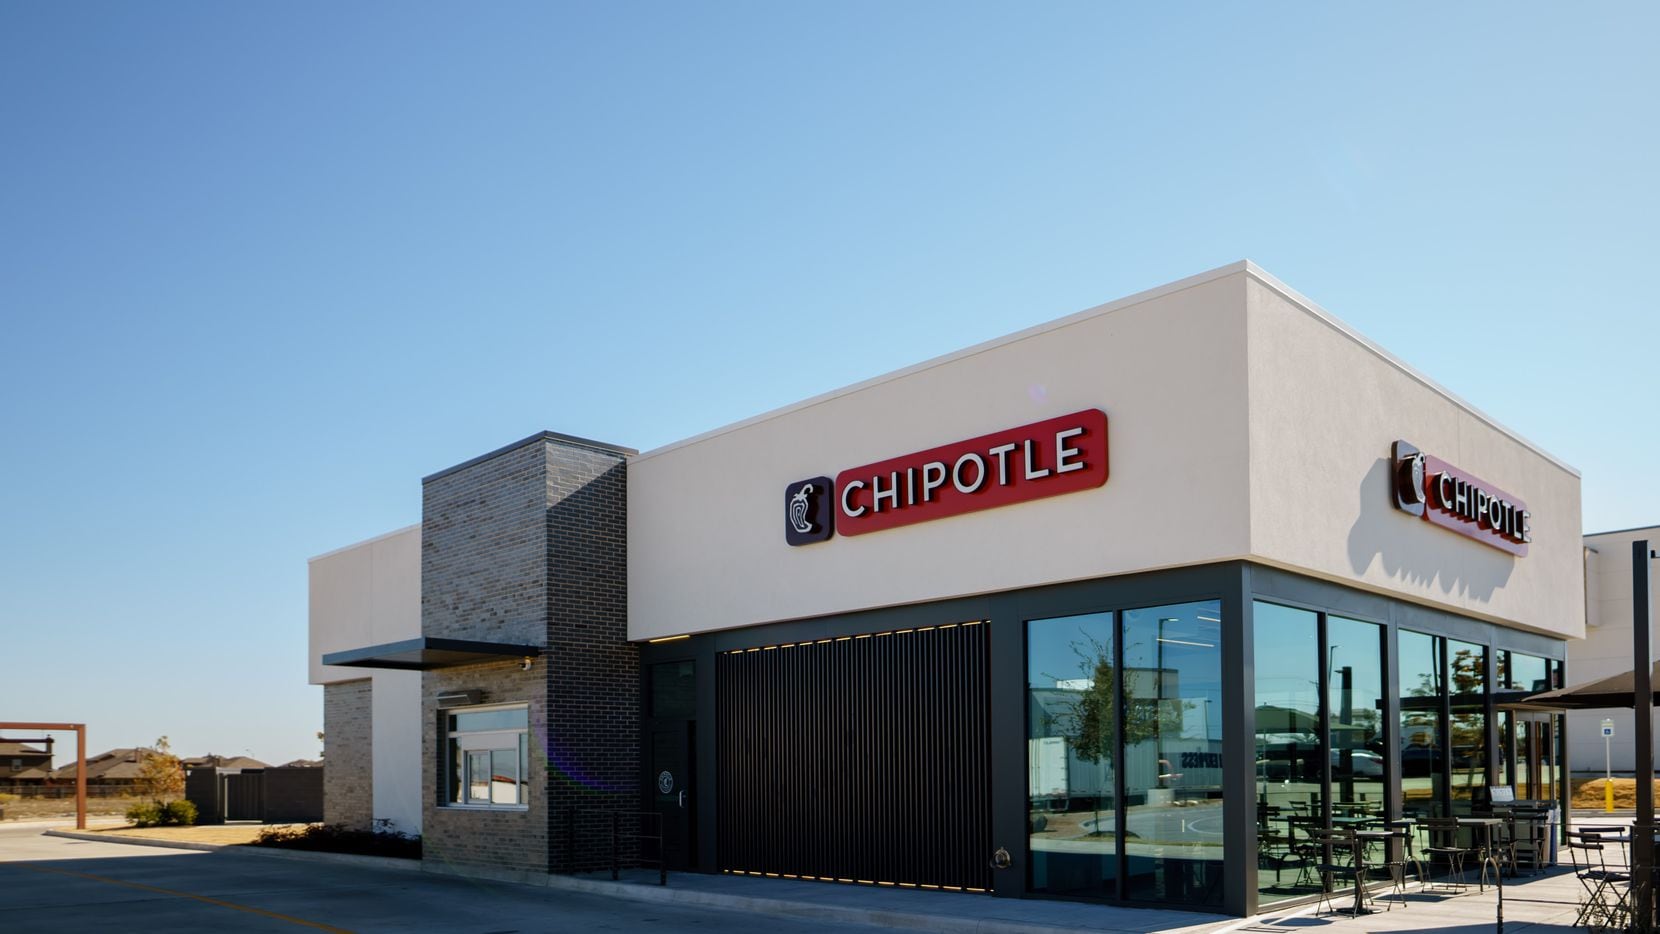 Chipotle debuts drivethrough service with new location in McKinney